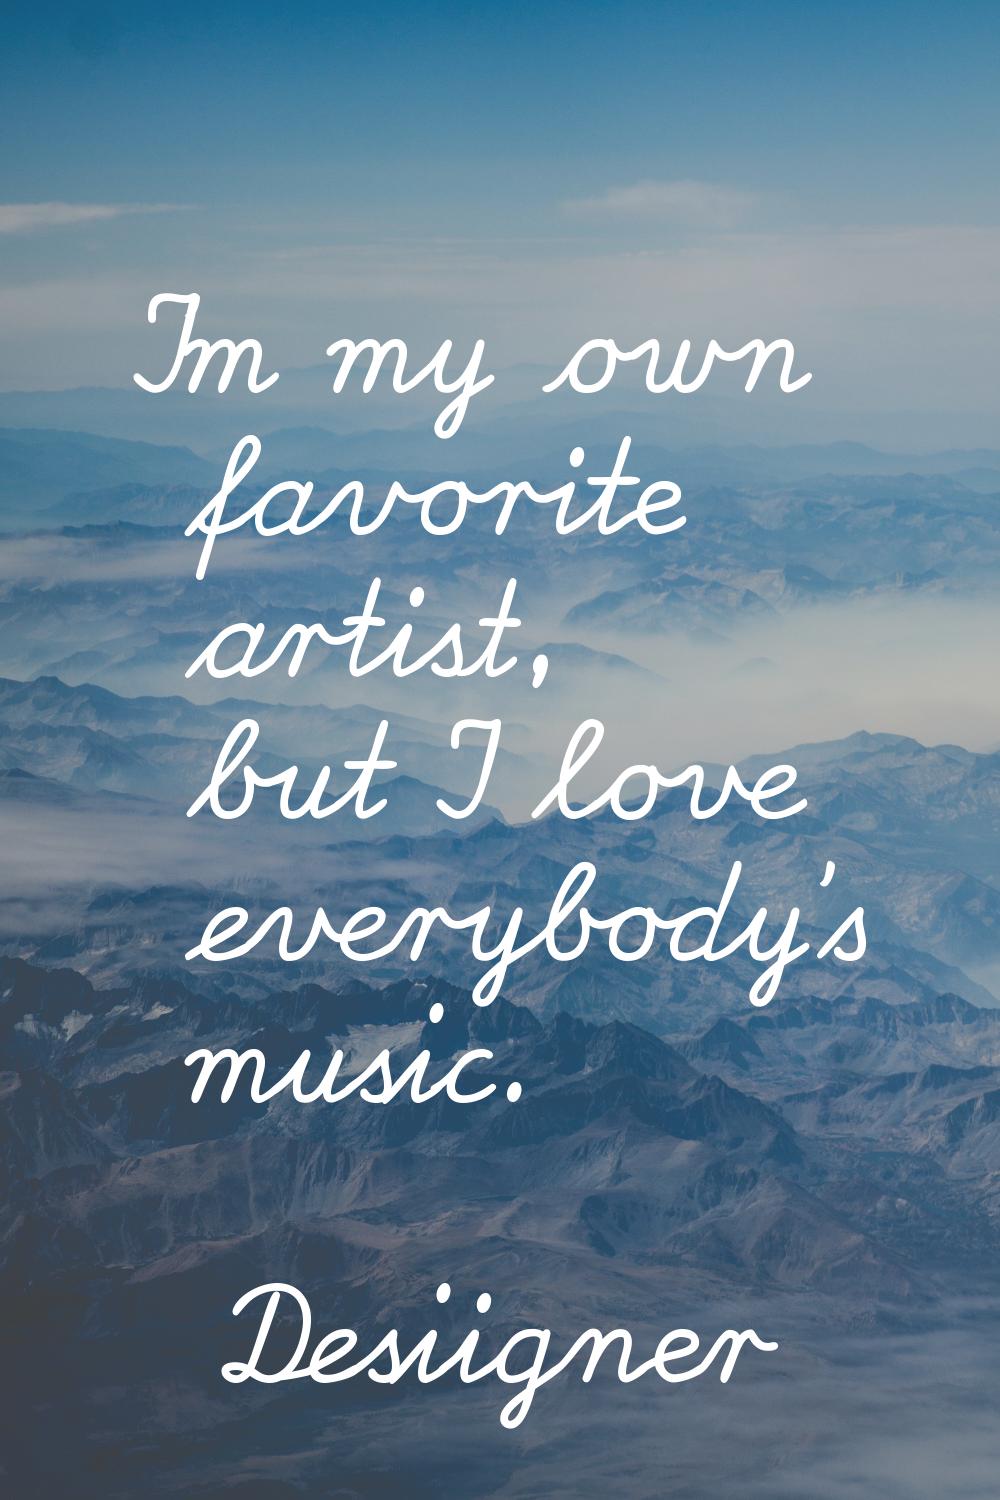 I'm my own favorite artist, but I love everybody's music.